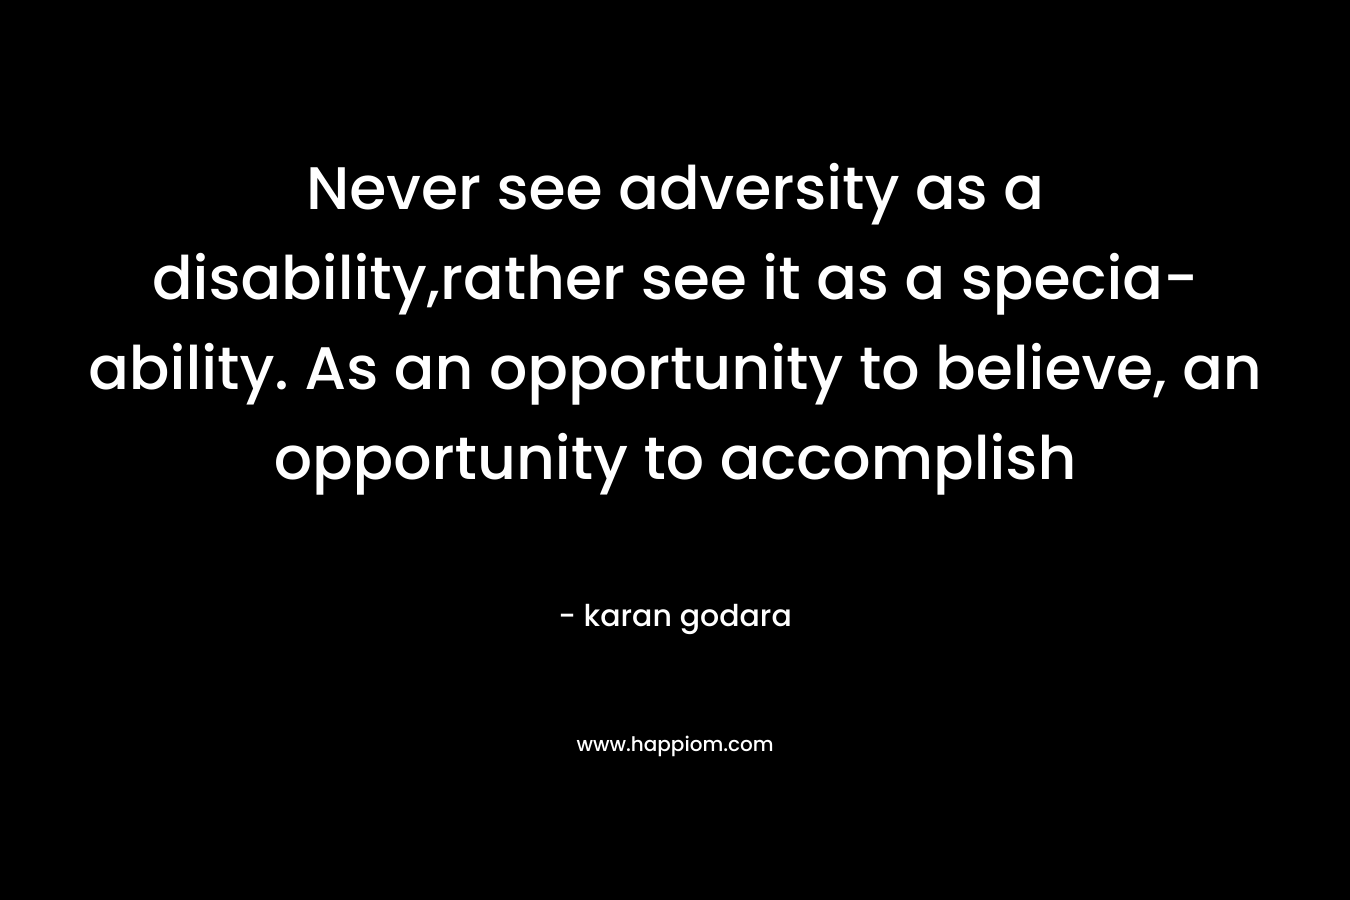 Never see adversity as a disability,rather see it as a specia-ability. As an opportunity to believe, an opportunity to accomplish